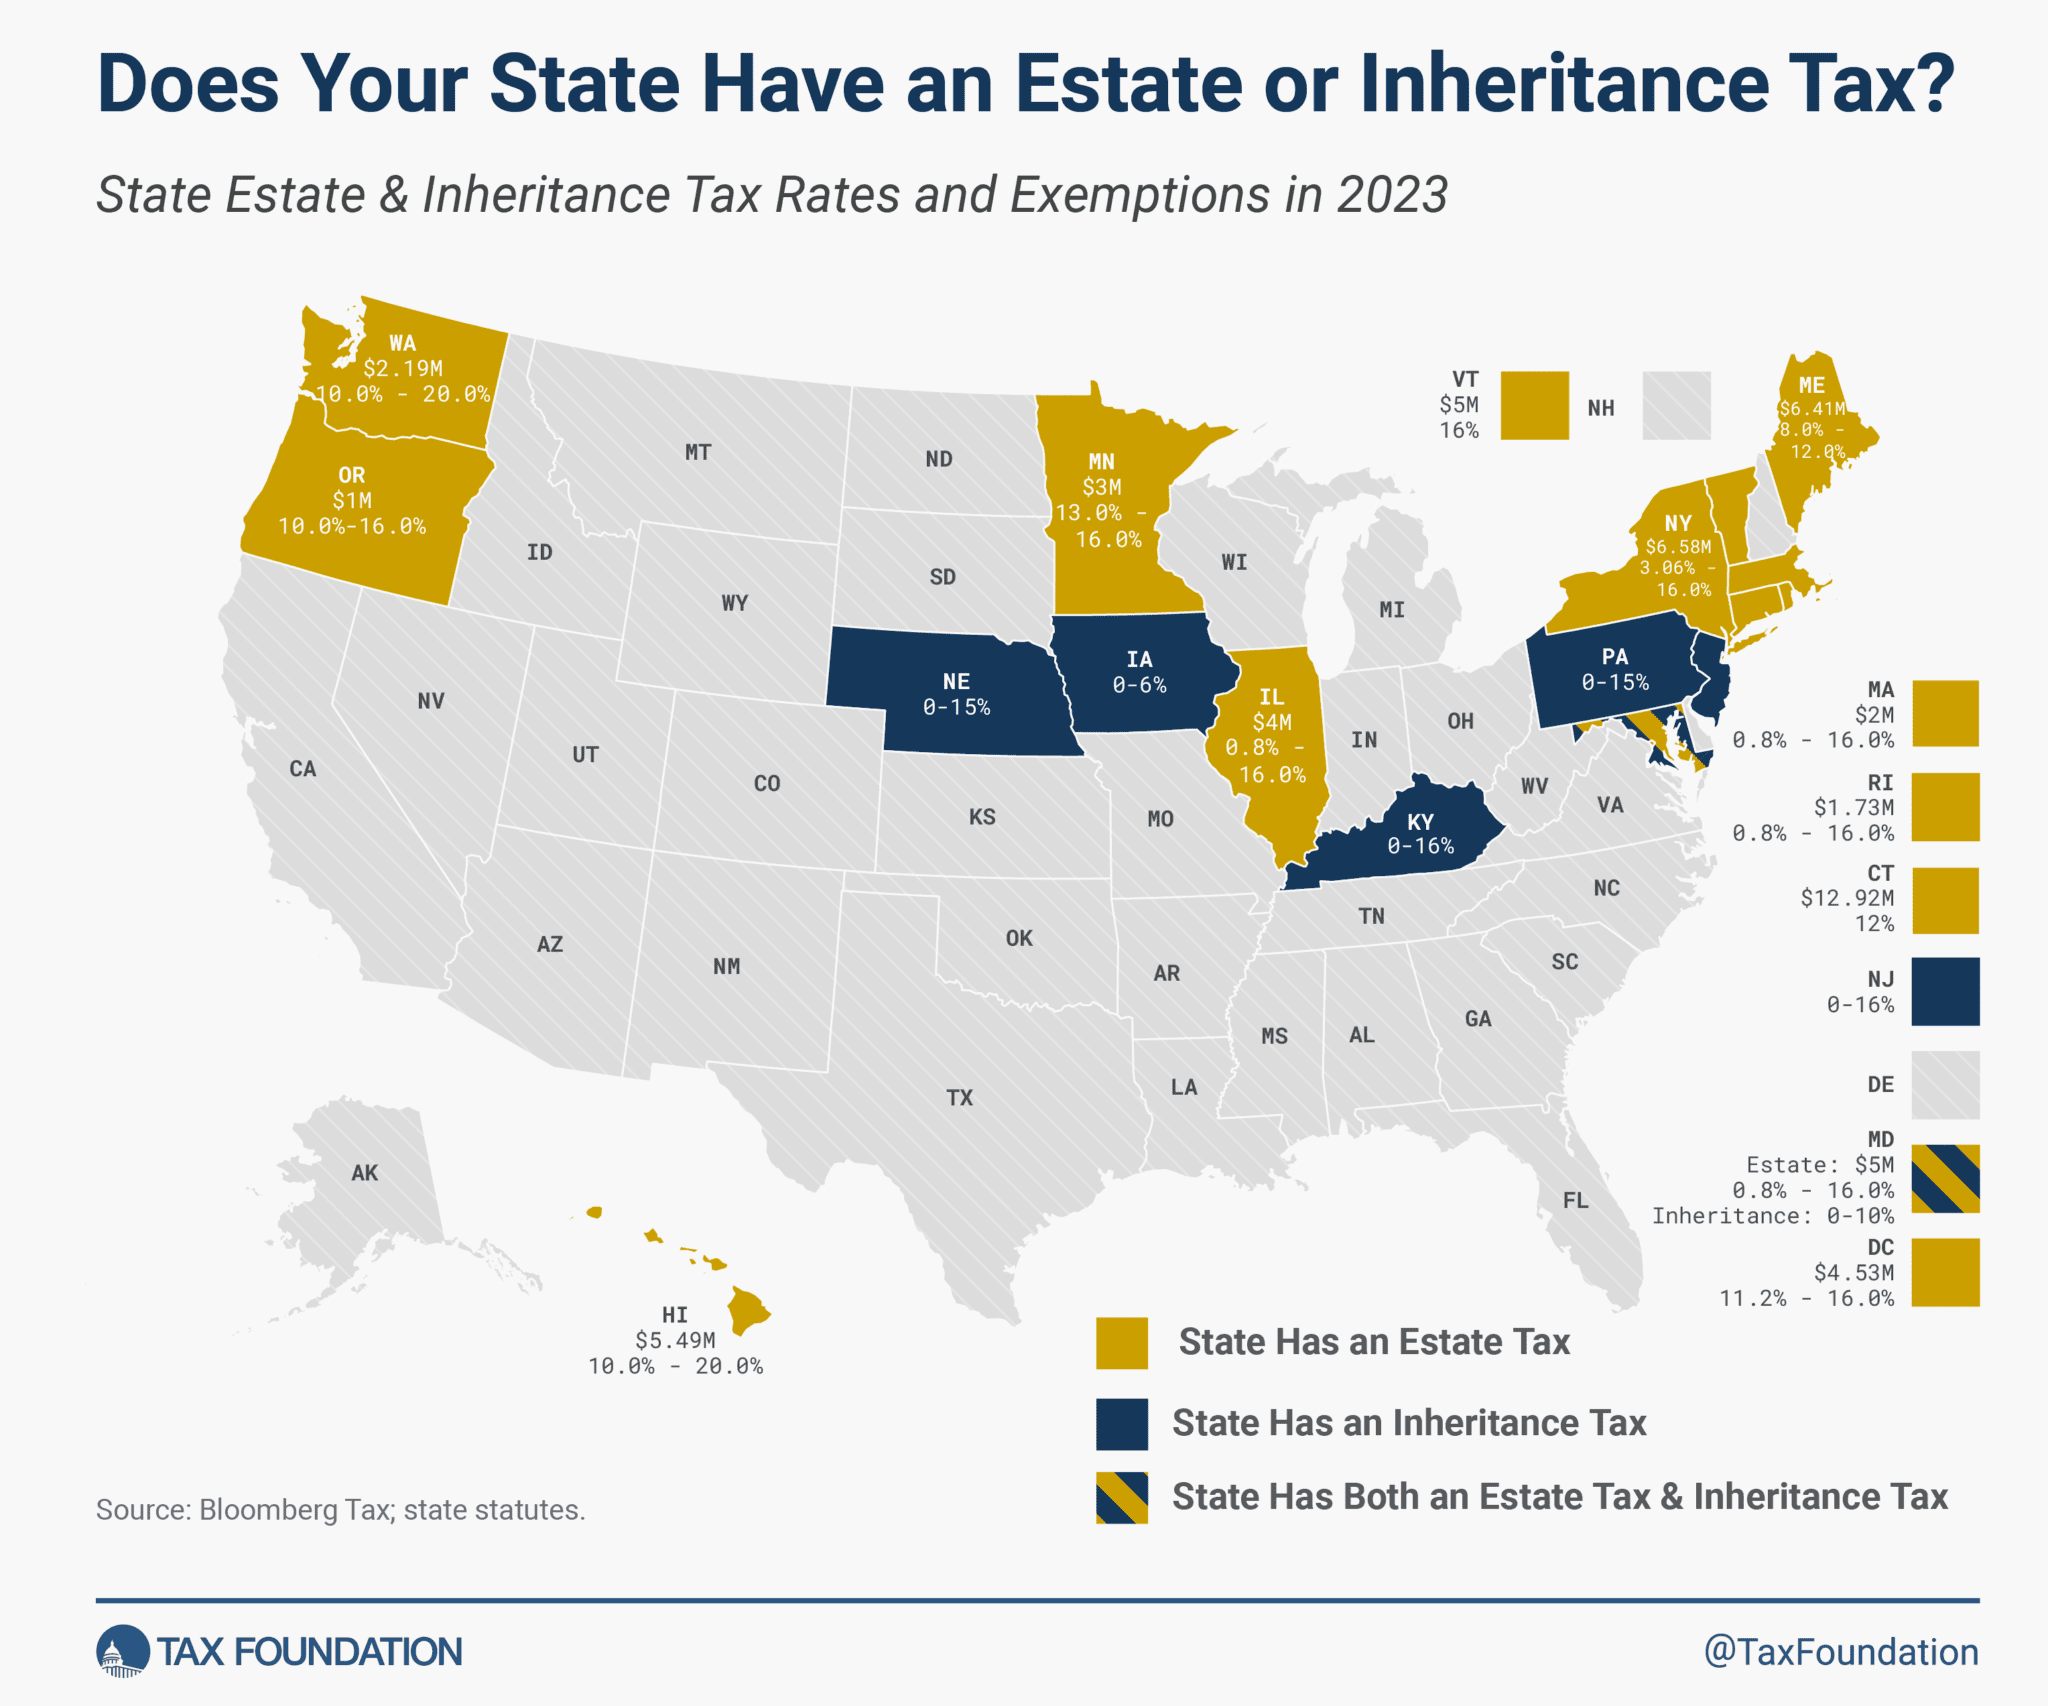 does Louisiana have an estate or inheritance tax?